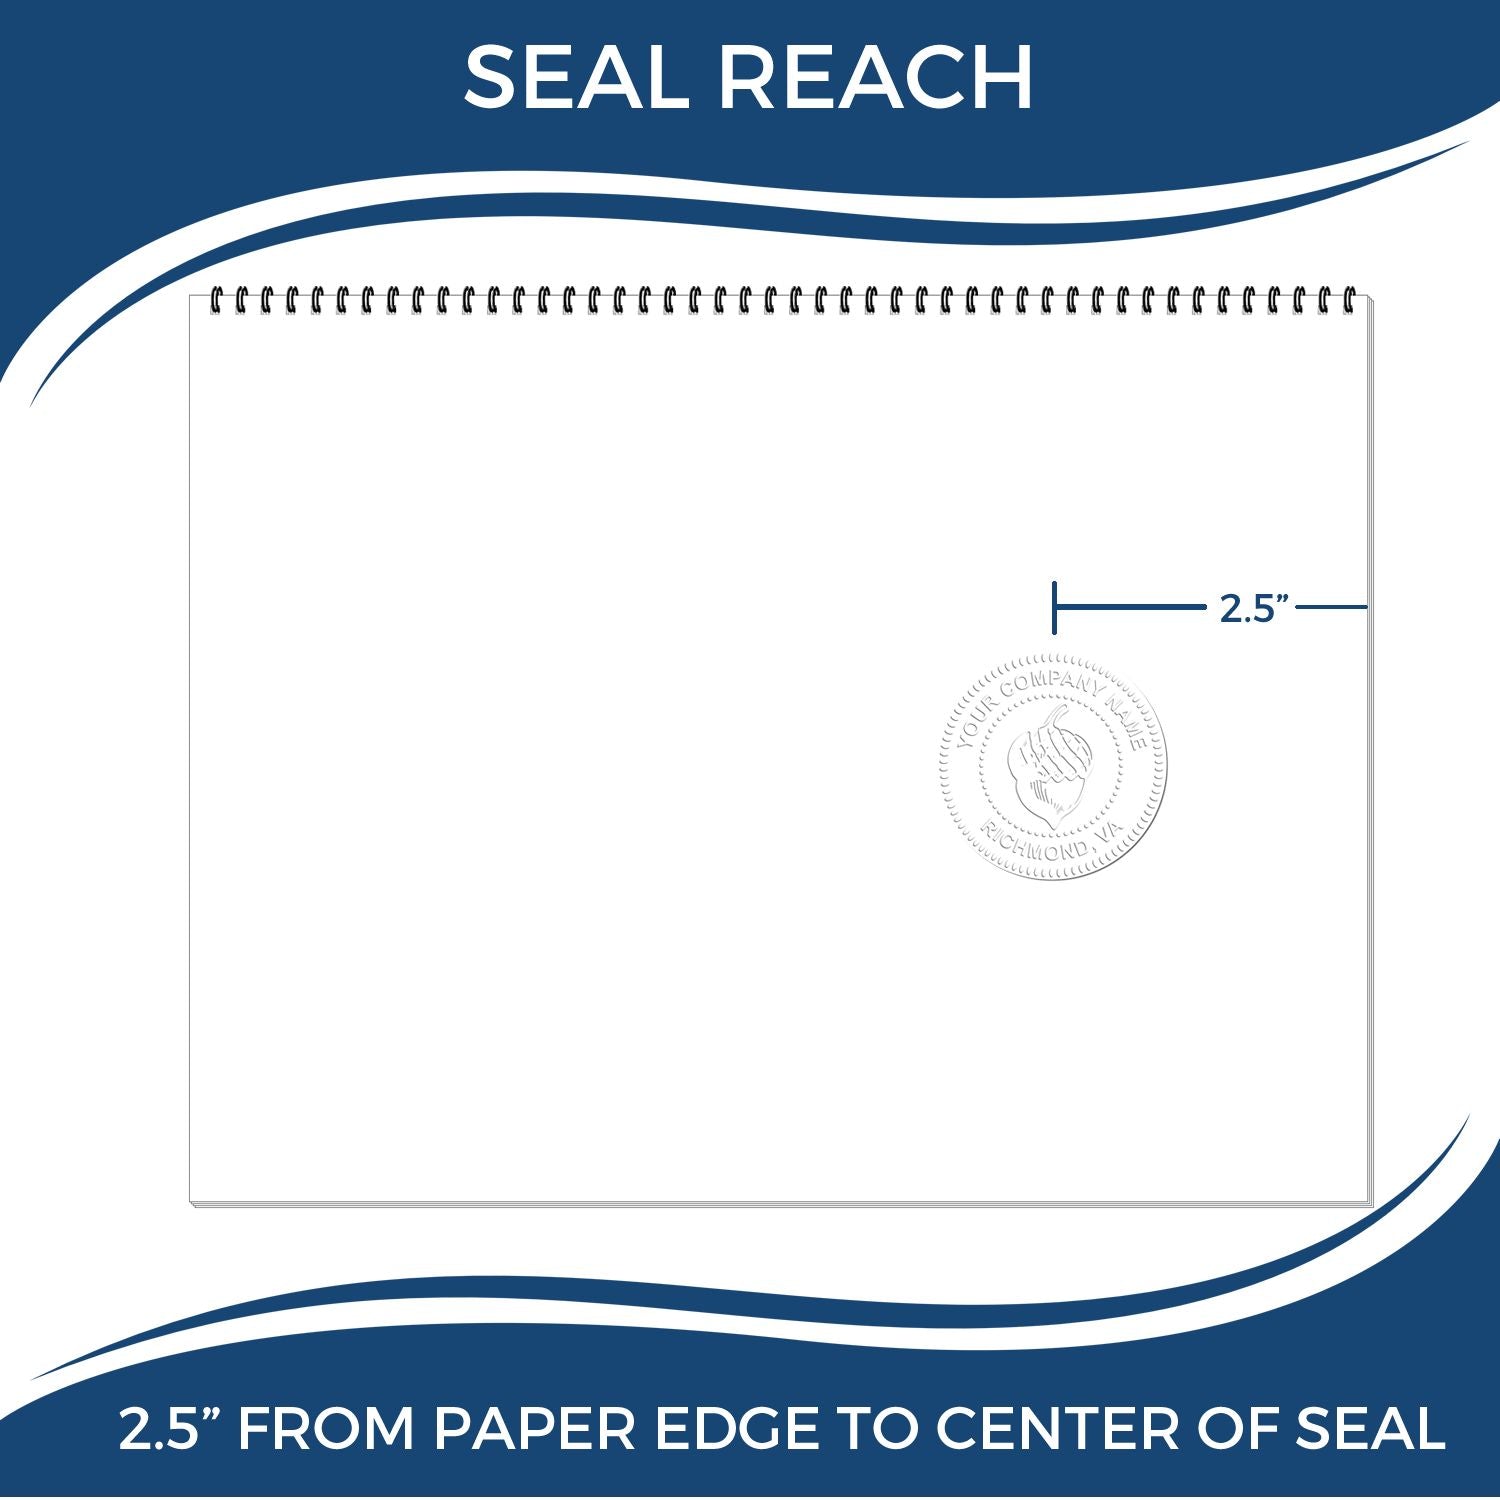 An infographic showing the seal reach which is represented by a ruler and a miniature seal image of the Long Reach Delaware PE Seal